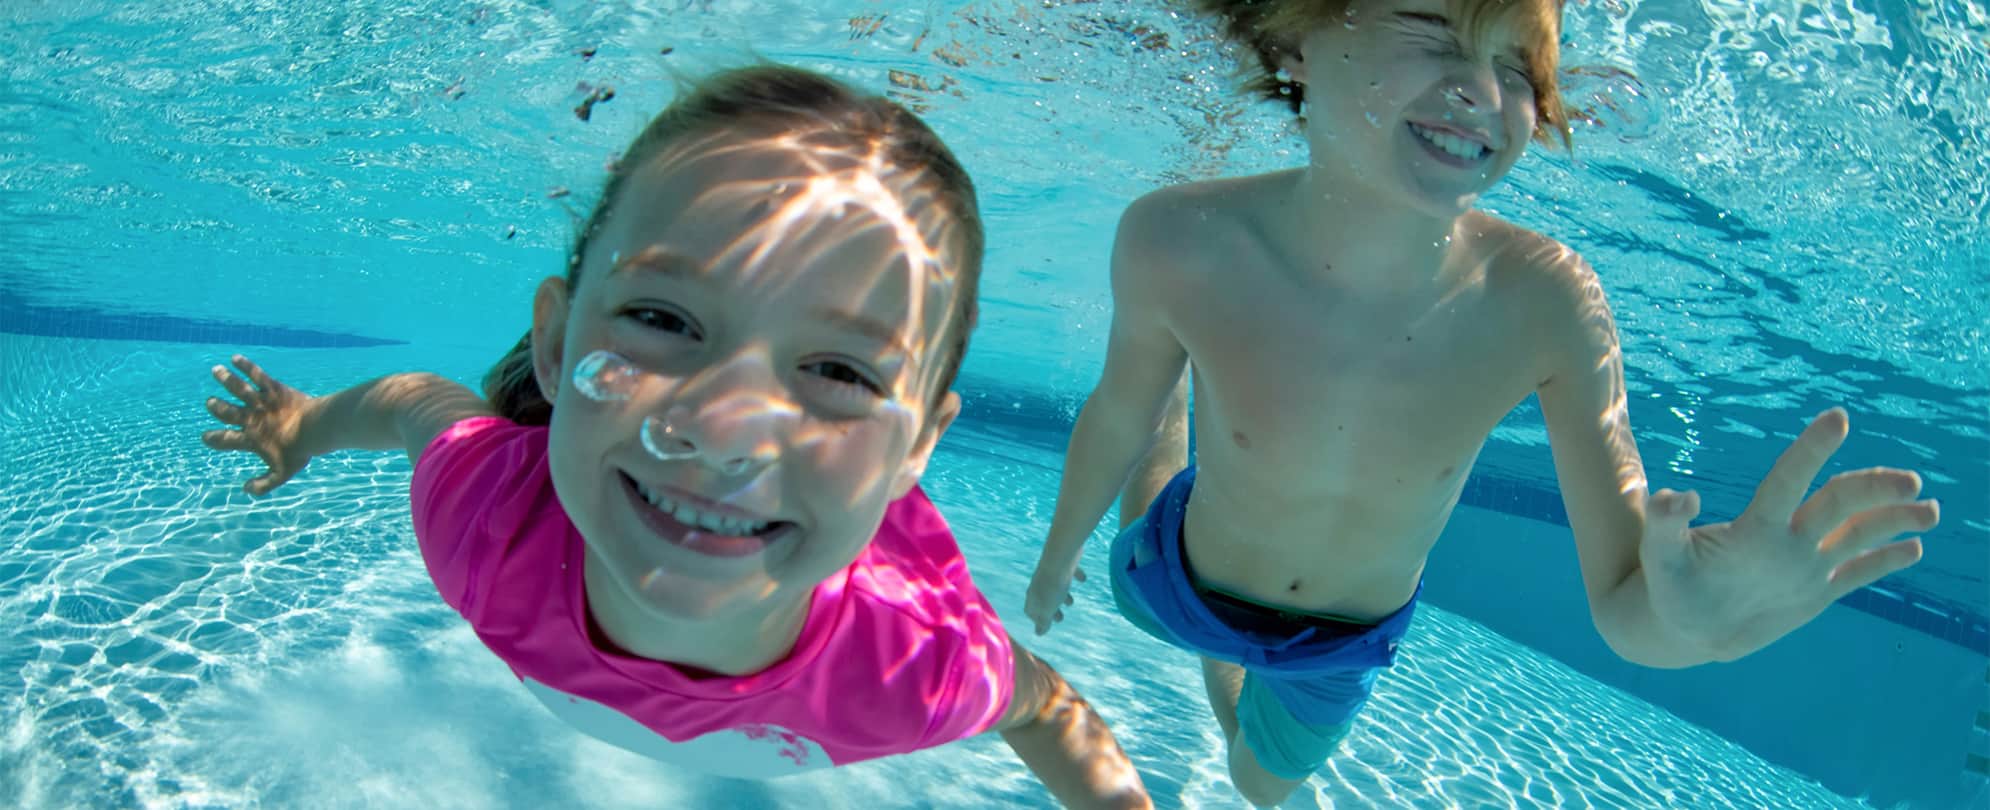 A little boy and girl, smiling underwater in a hotel pool.